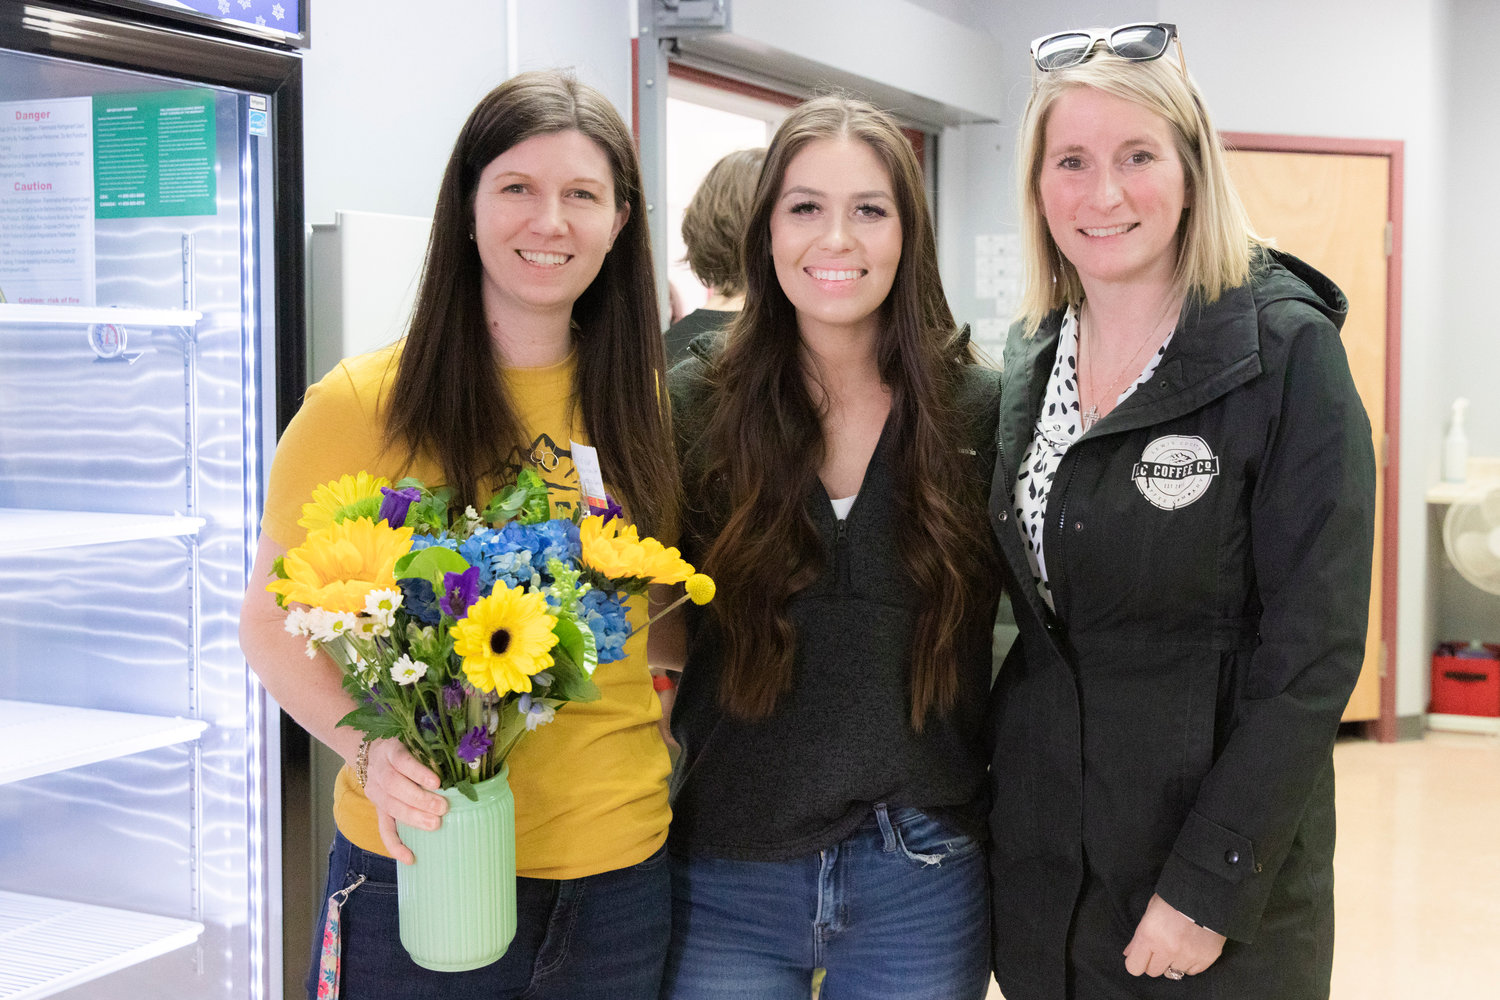 From left, Kristin Ciolli, Angie Twining and Sam Magnuson pose for a photo as Lewis County Coffee Co. celebrates a ribbon cutting ceremony on Wednesday for a new student store "The Crimson & Gray," at W.F. West High School in Chehalis.